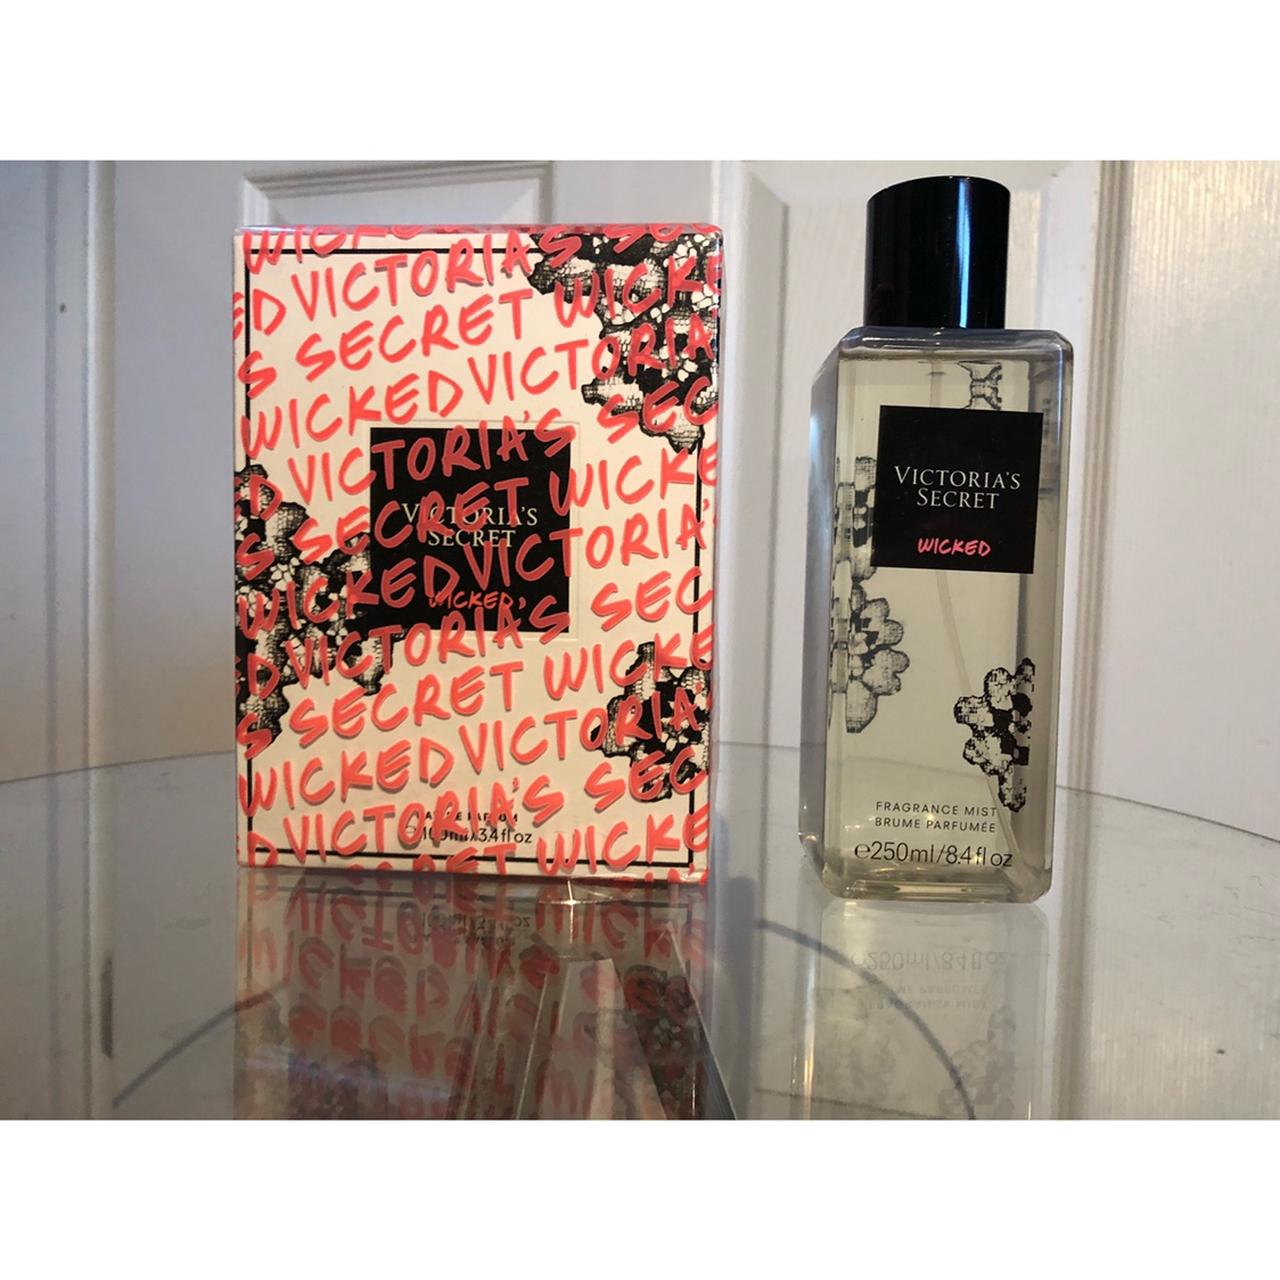 Wicked by Victoria's Secret (Solid Fragrance) » Reviews & Perfume Facts